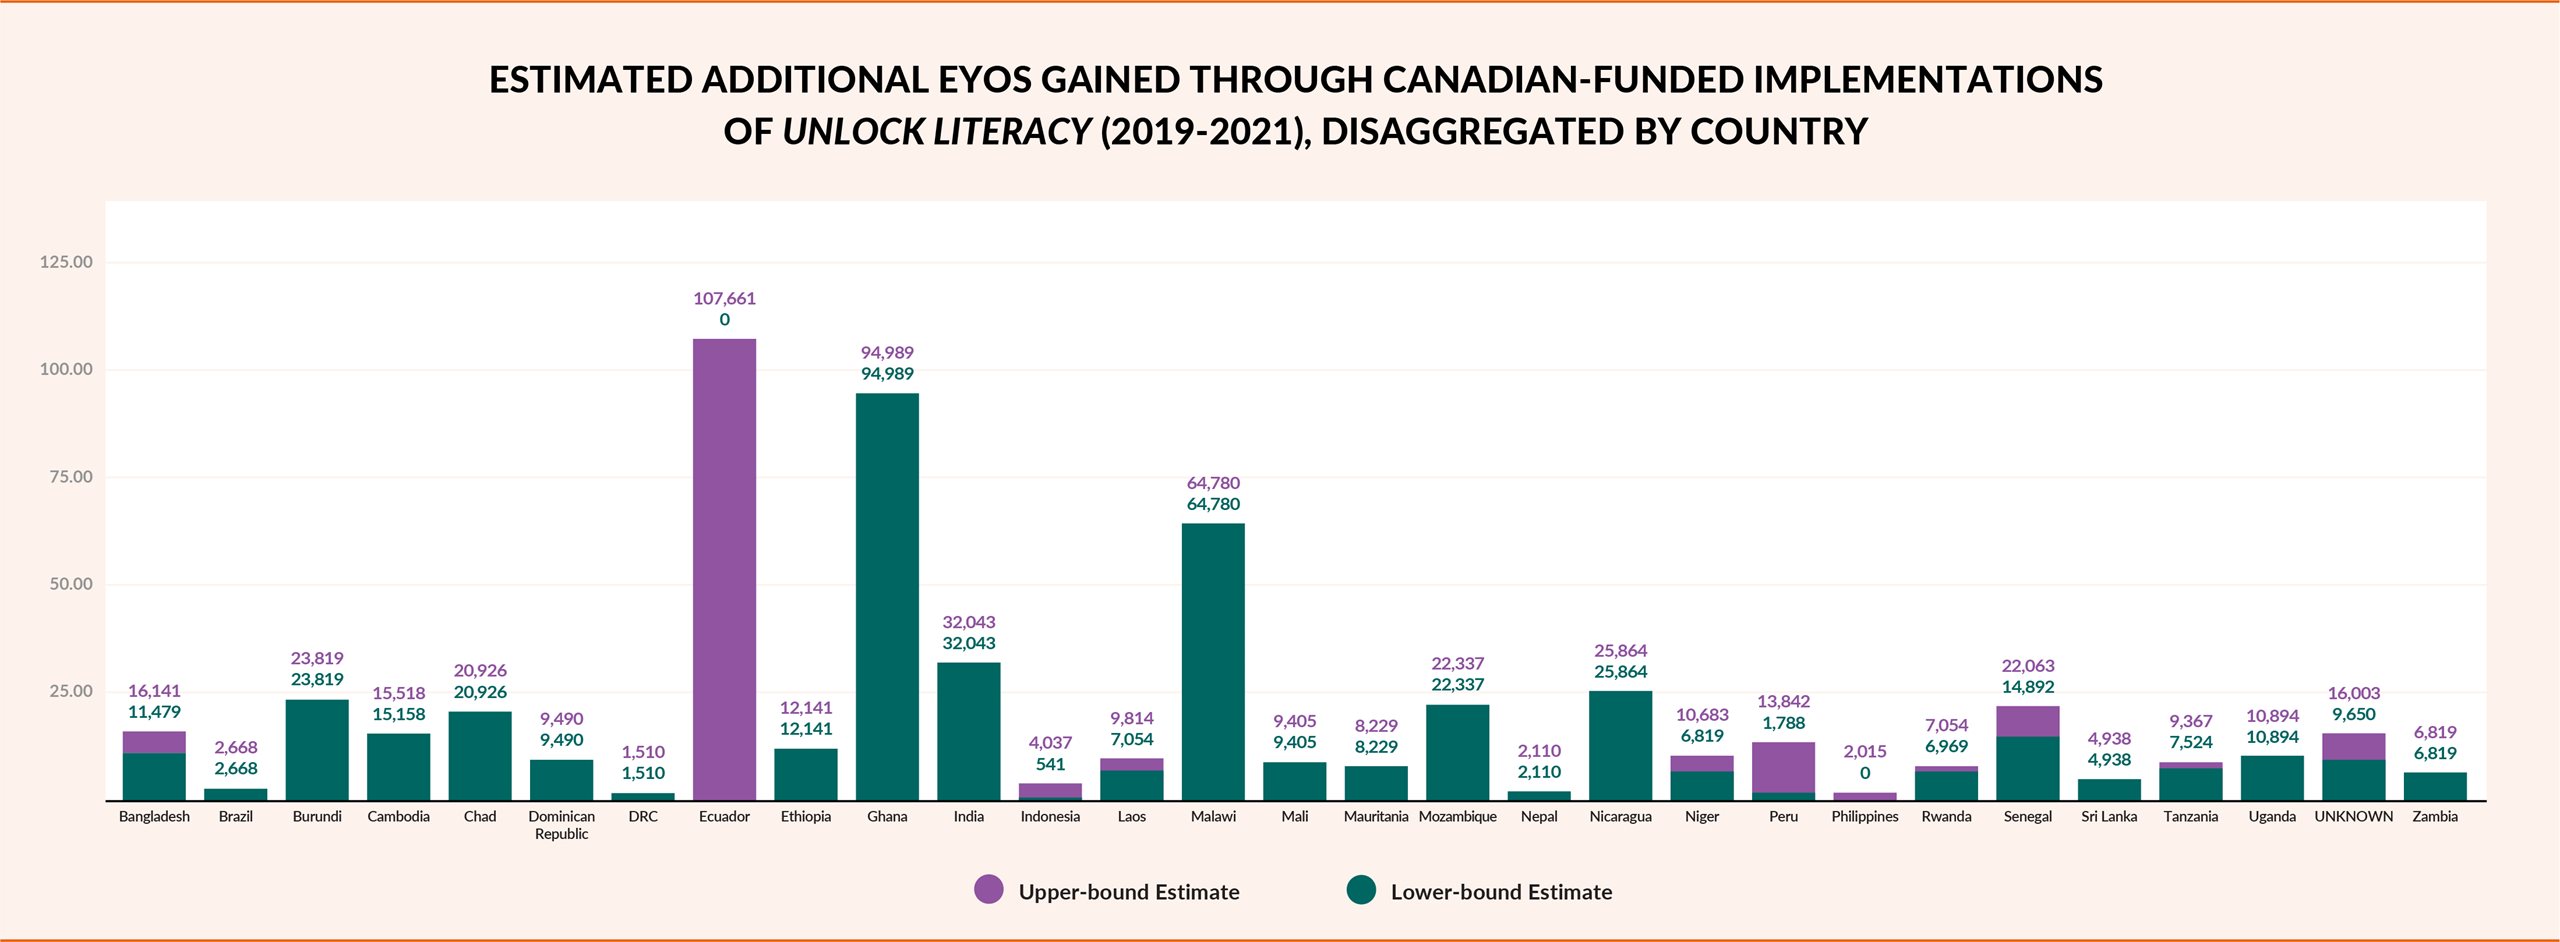 Graph shows the estimated additional equivalent years of schooling gained through Canadian-funded implementations of Unlock Literacy between 2019 and 2021, disaggregated by country.